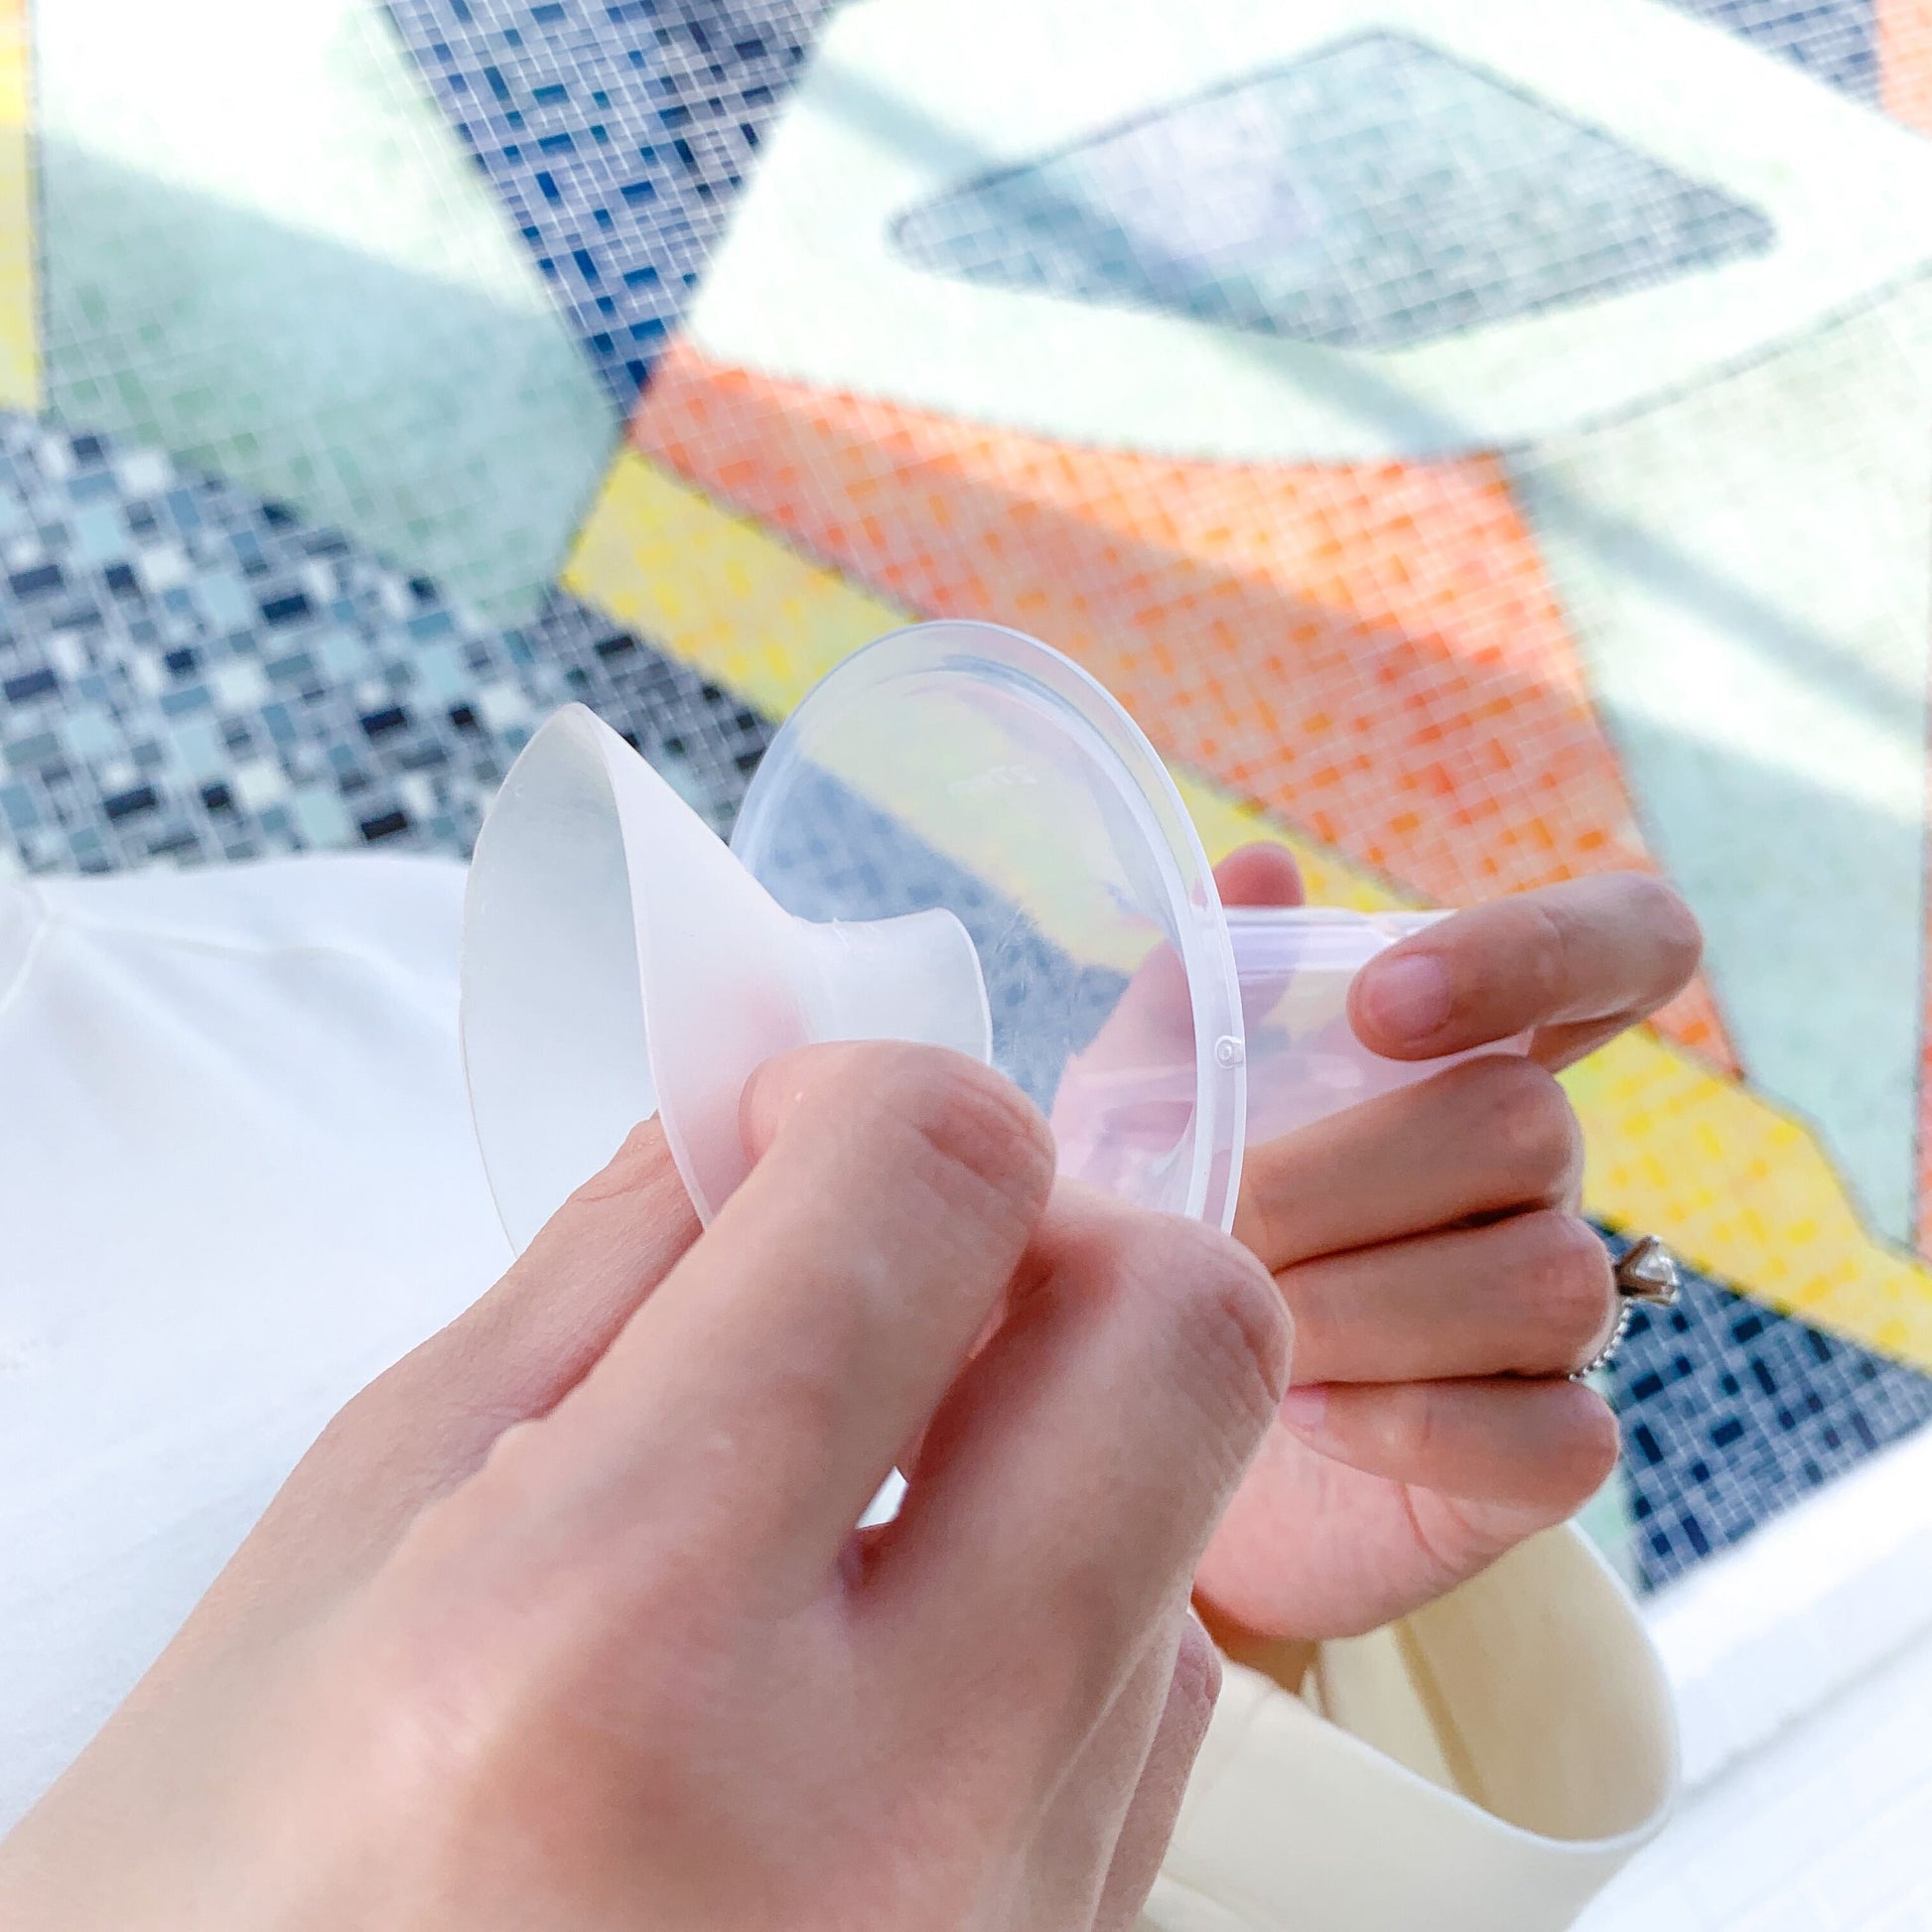 Using your first pair of Clearly comfy cushions is easy! Just wash and dry your breast pump cushion, and then insert it directly into your breast pump flange as shown here.